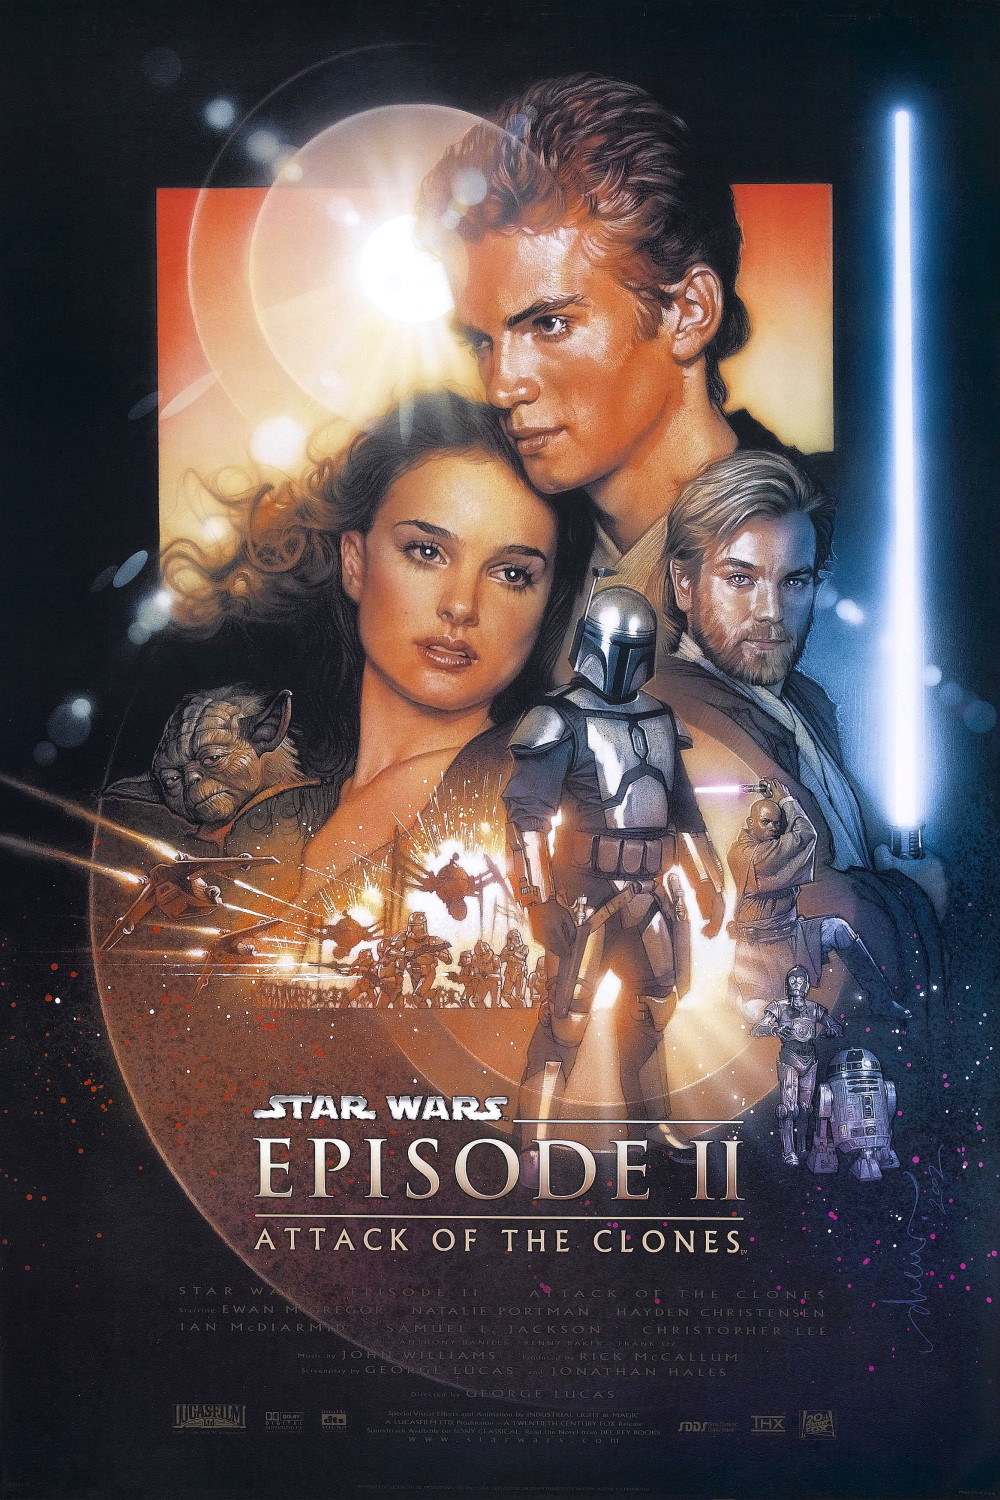 Star Wars: Episode II – Attack of the Clones (2002) Poster